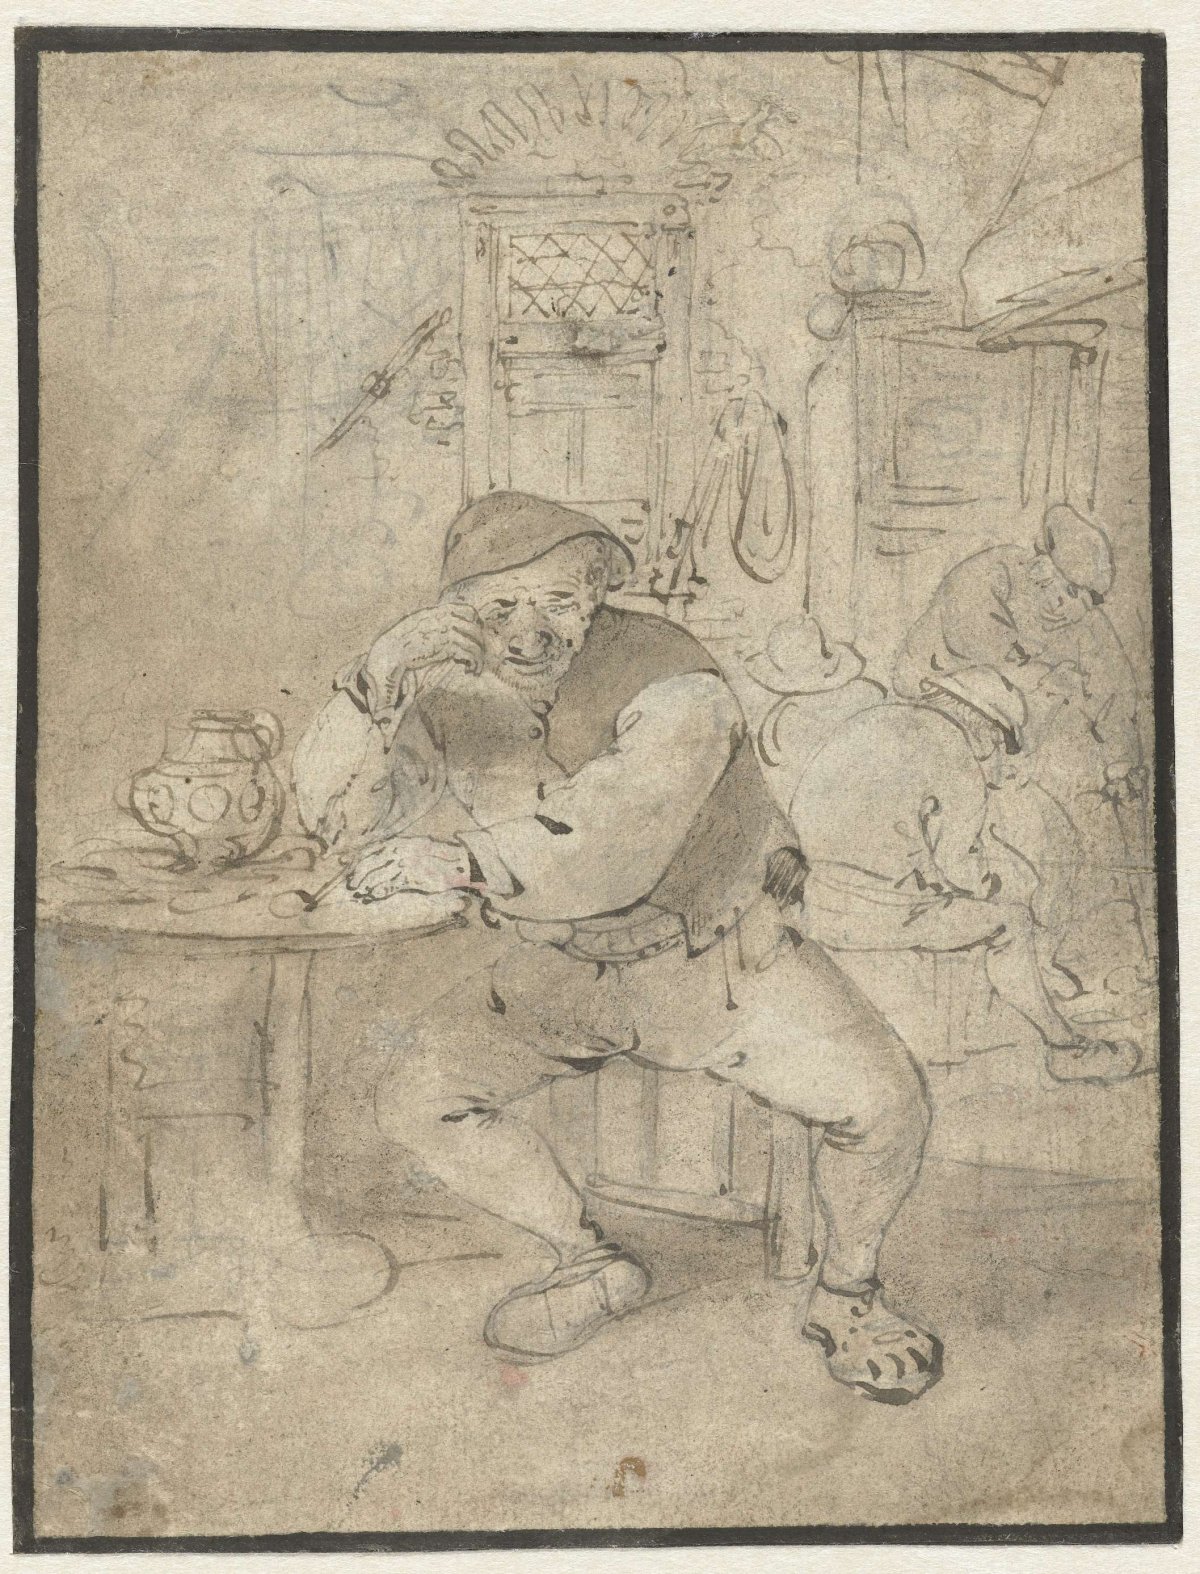 Seated peasant, leaning on a small table, Isaac van Ostade, 1644 - 1649